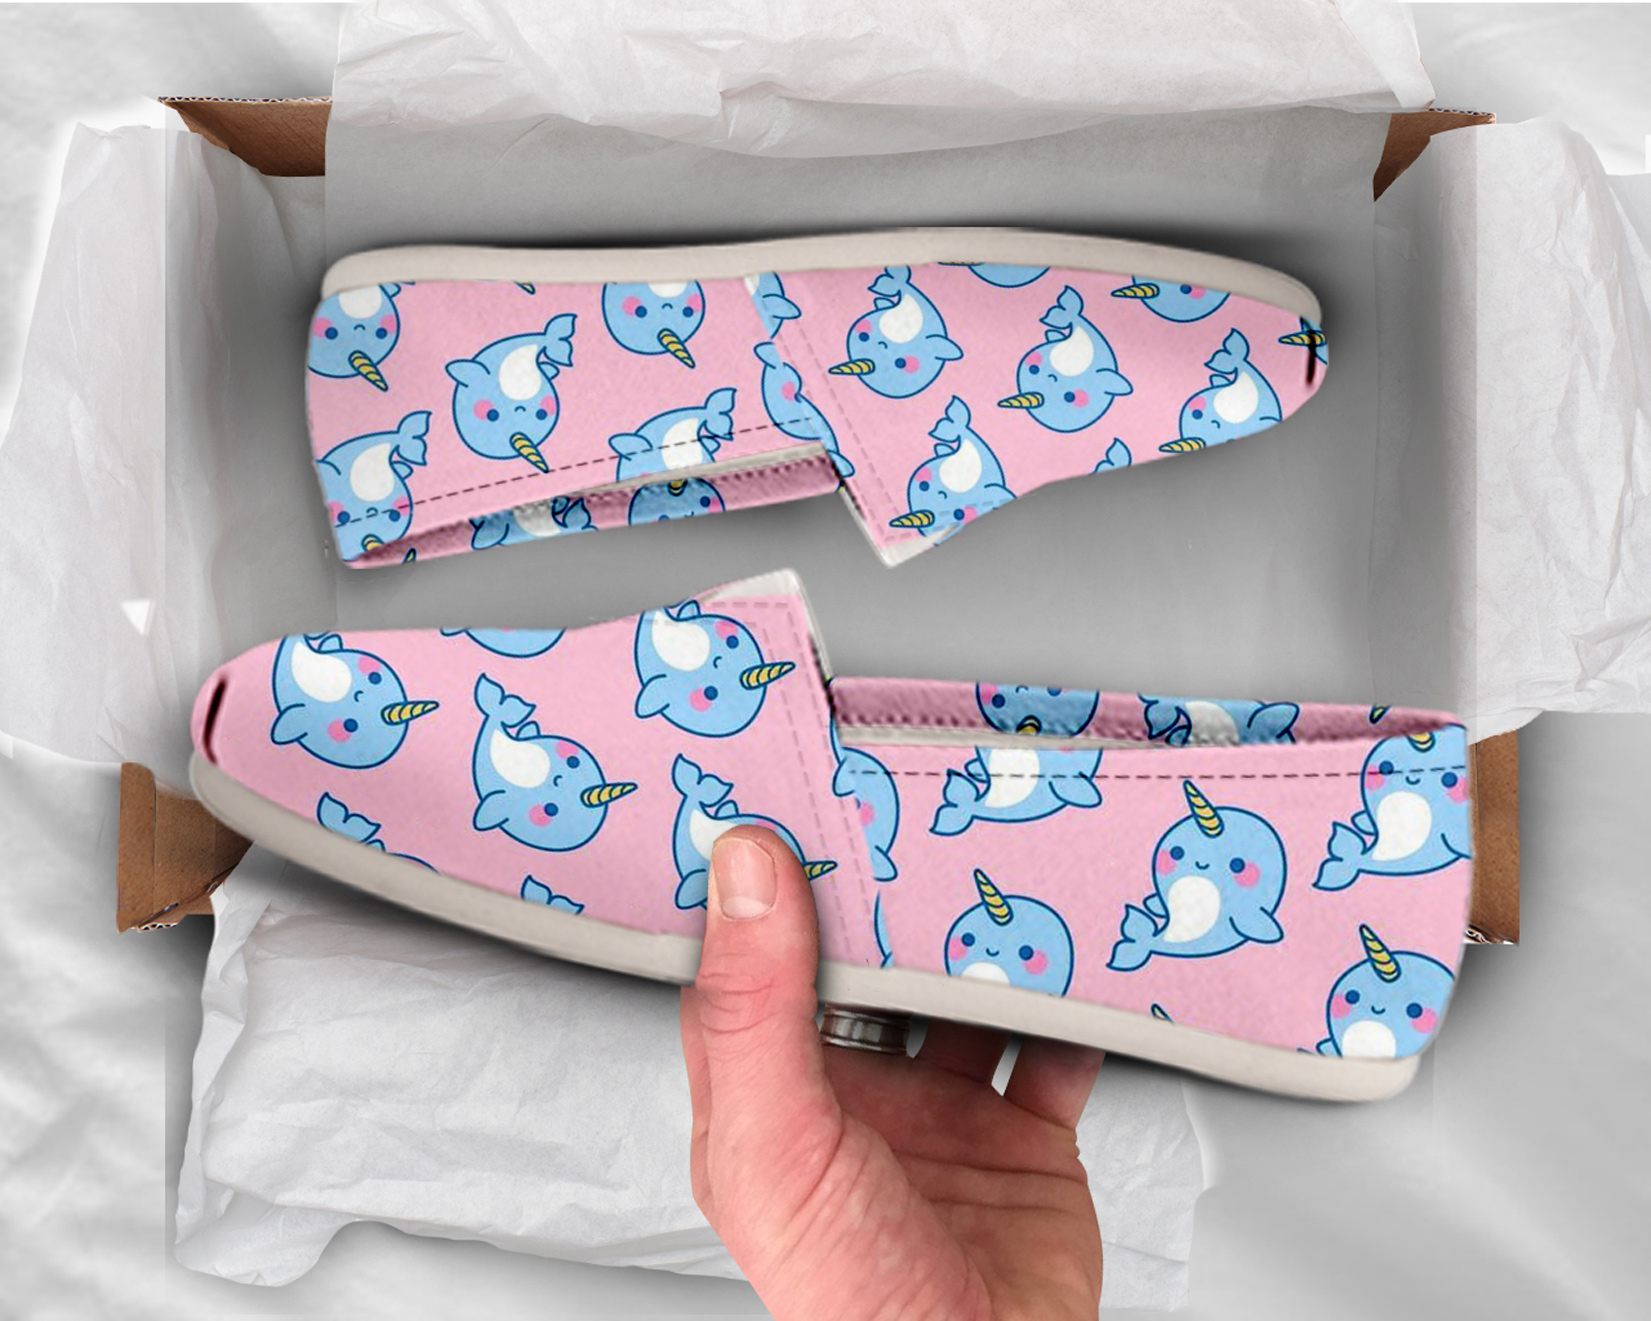 Pink Narwhal Shoes | Custom Canvas Sneakers For Kids & Adults